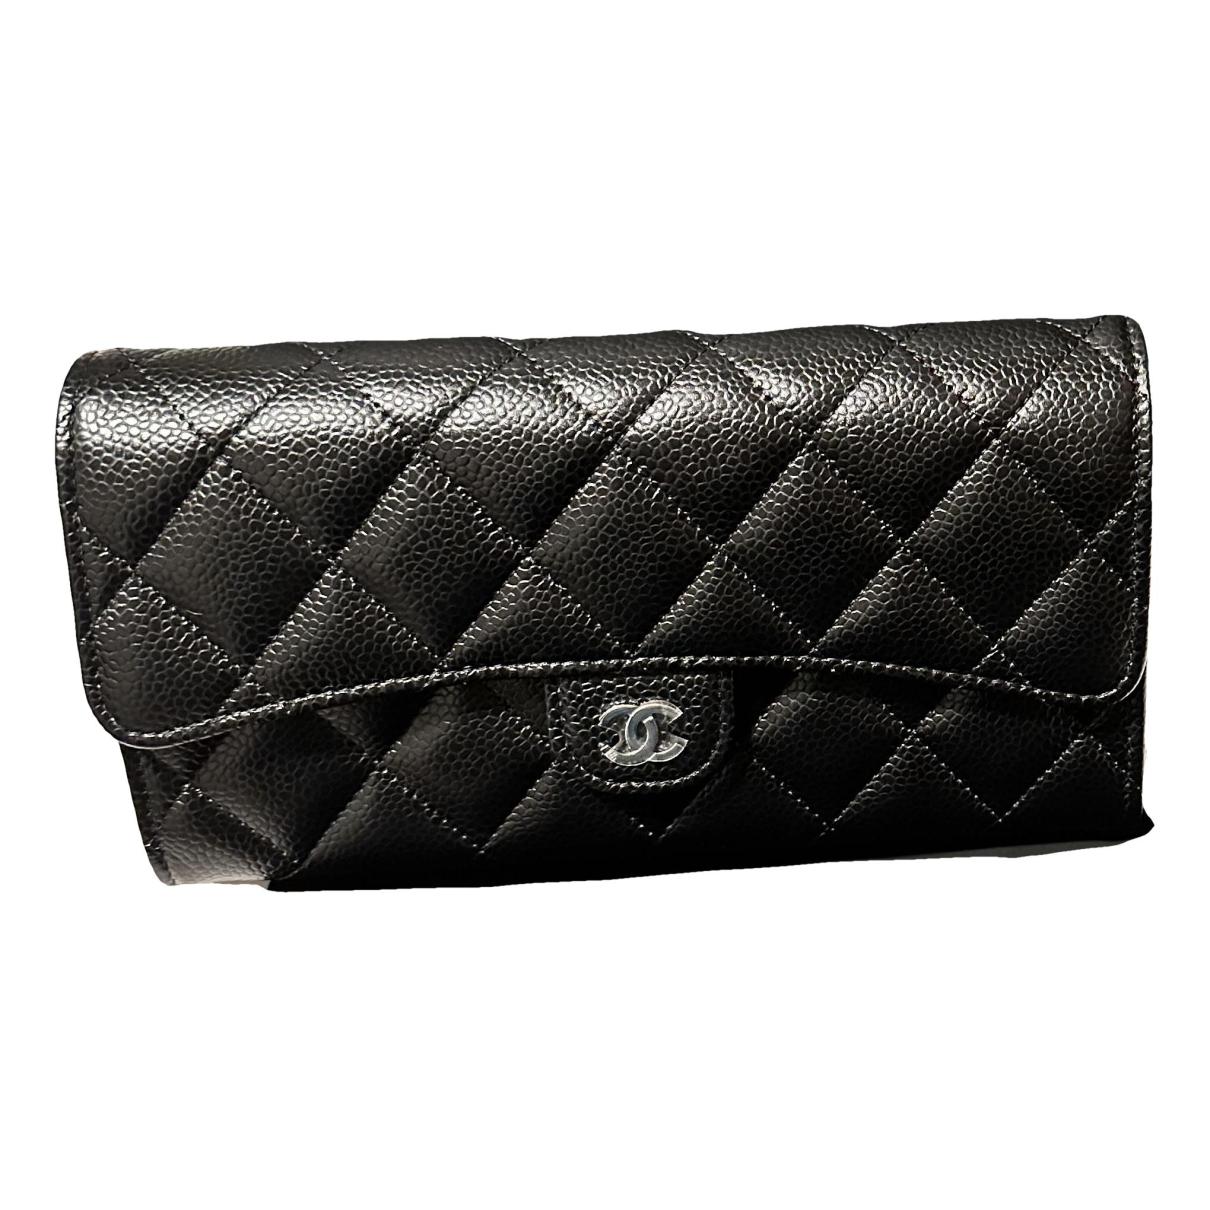 Timeless/classique leather wallet Chanel Black in Leather - 37374014